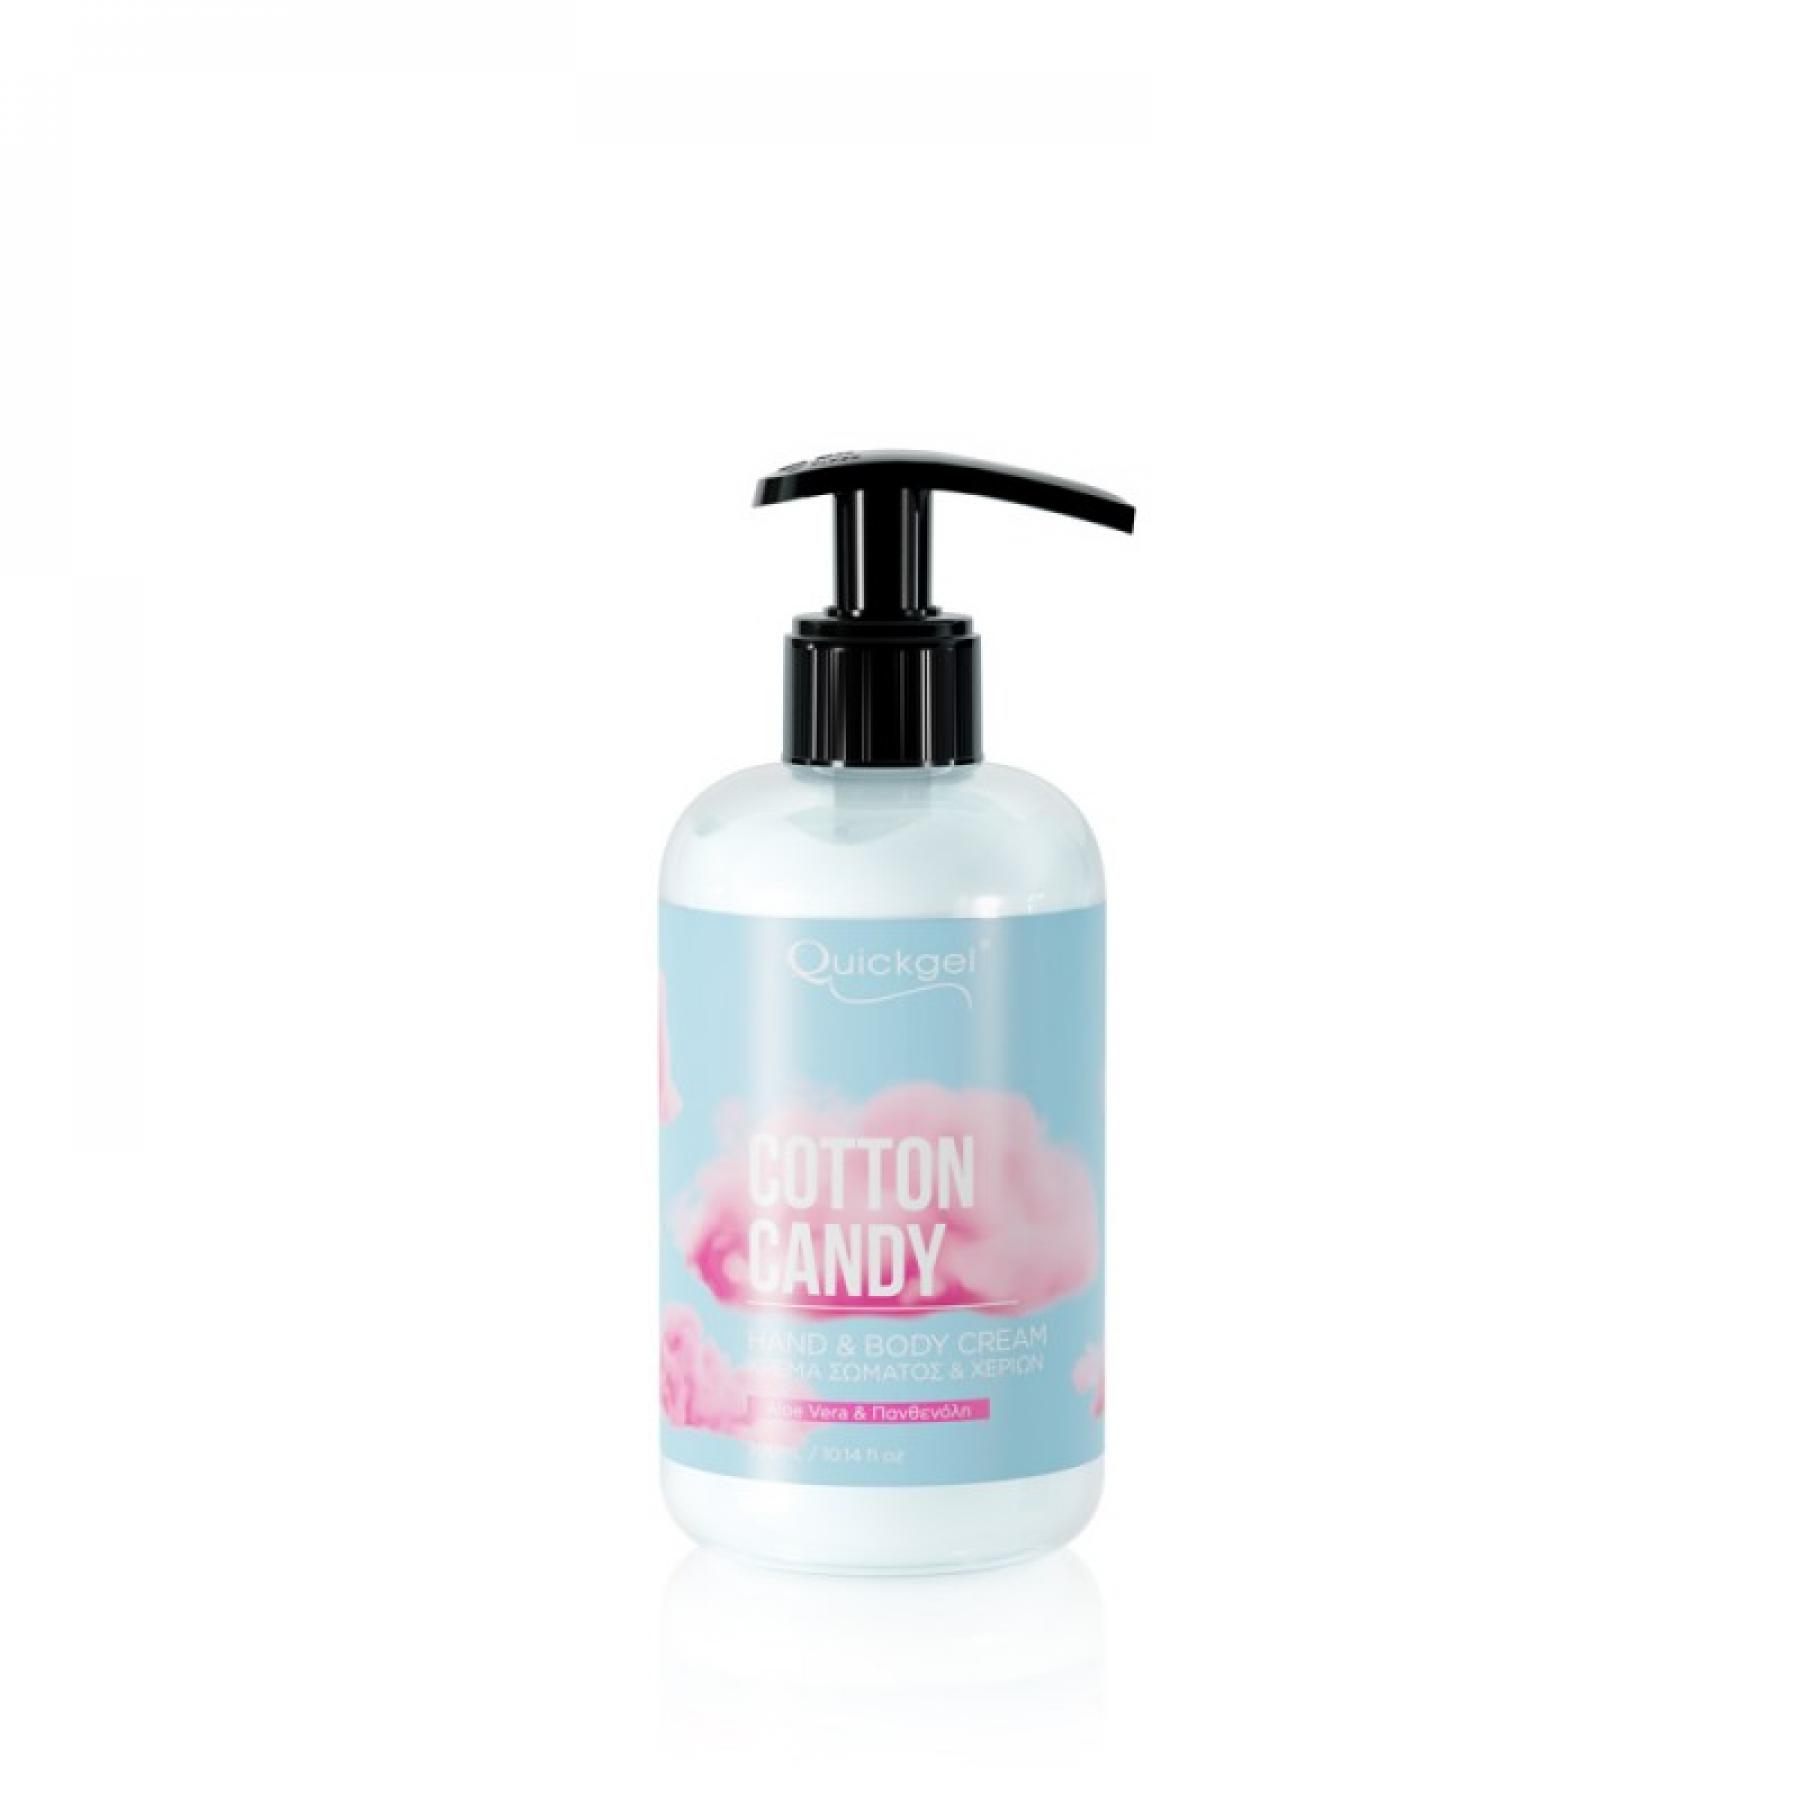 Hand and body cream 300ml cotton candy 